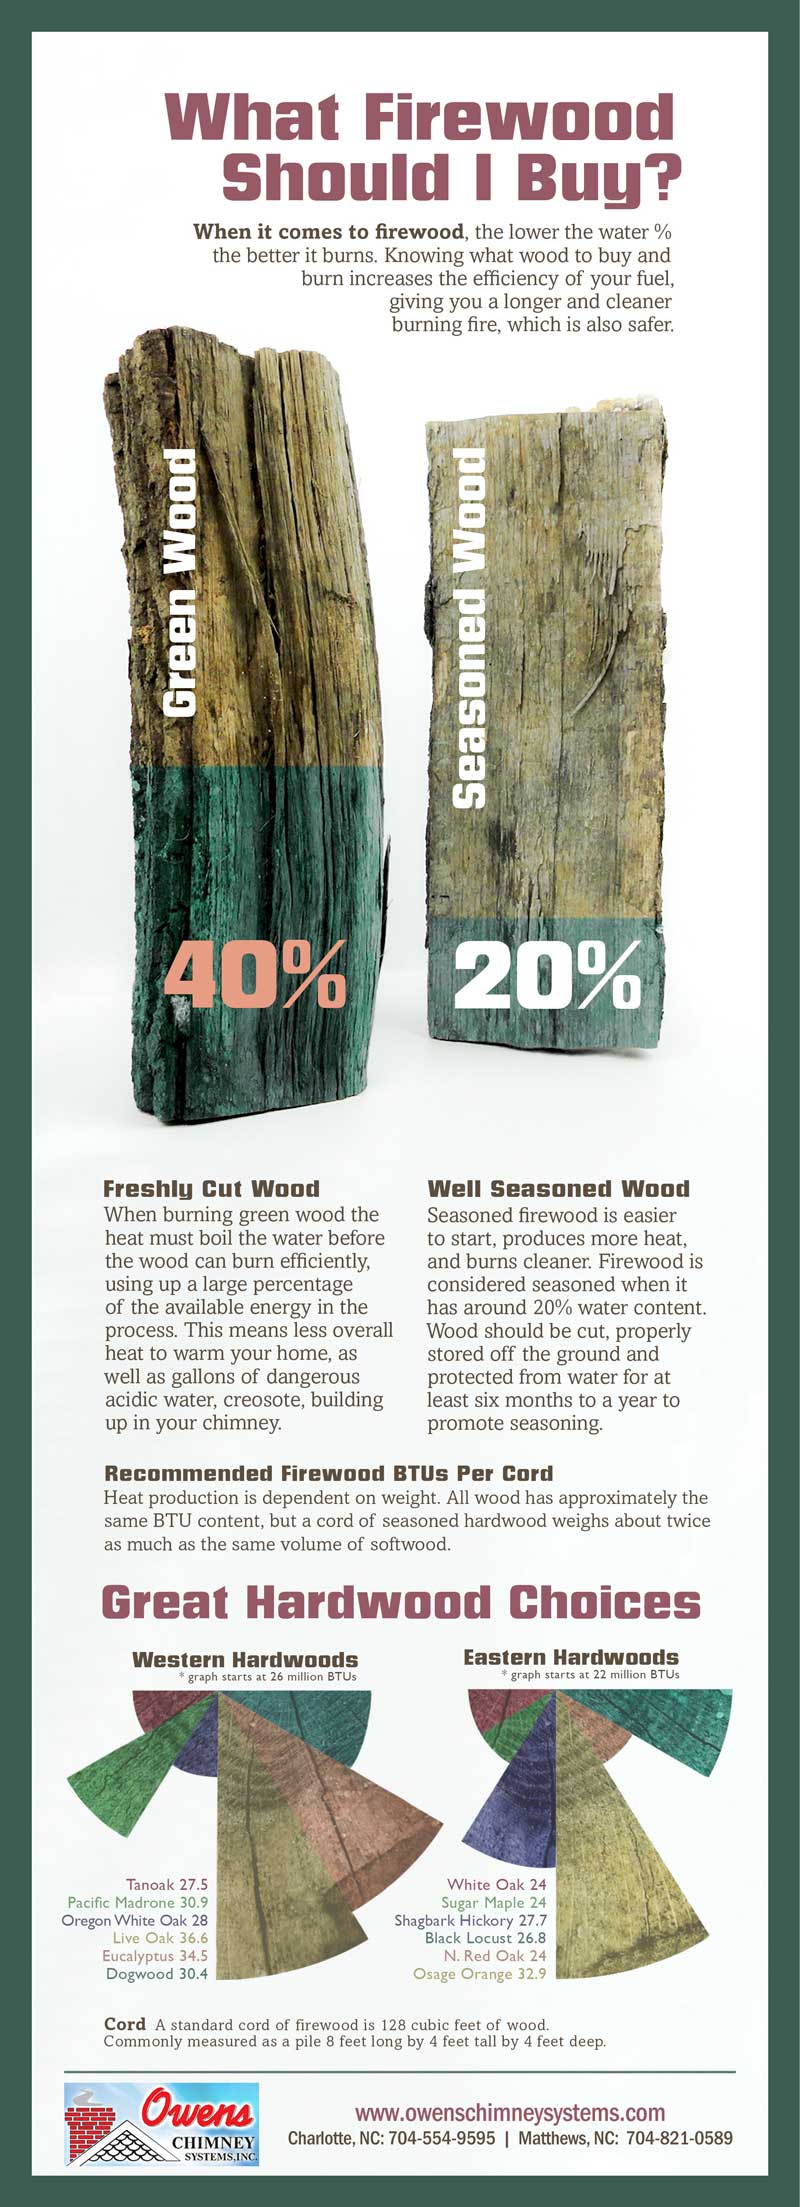 Owens Chimney Systems - What type of firewood should you buy?